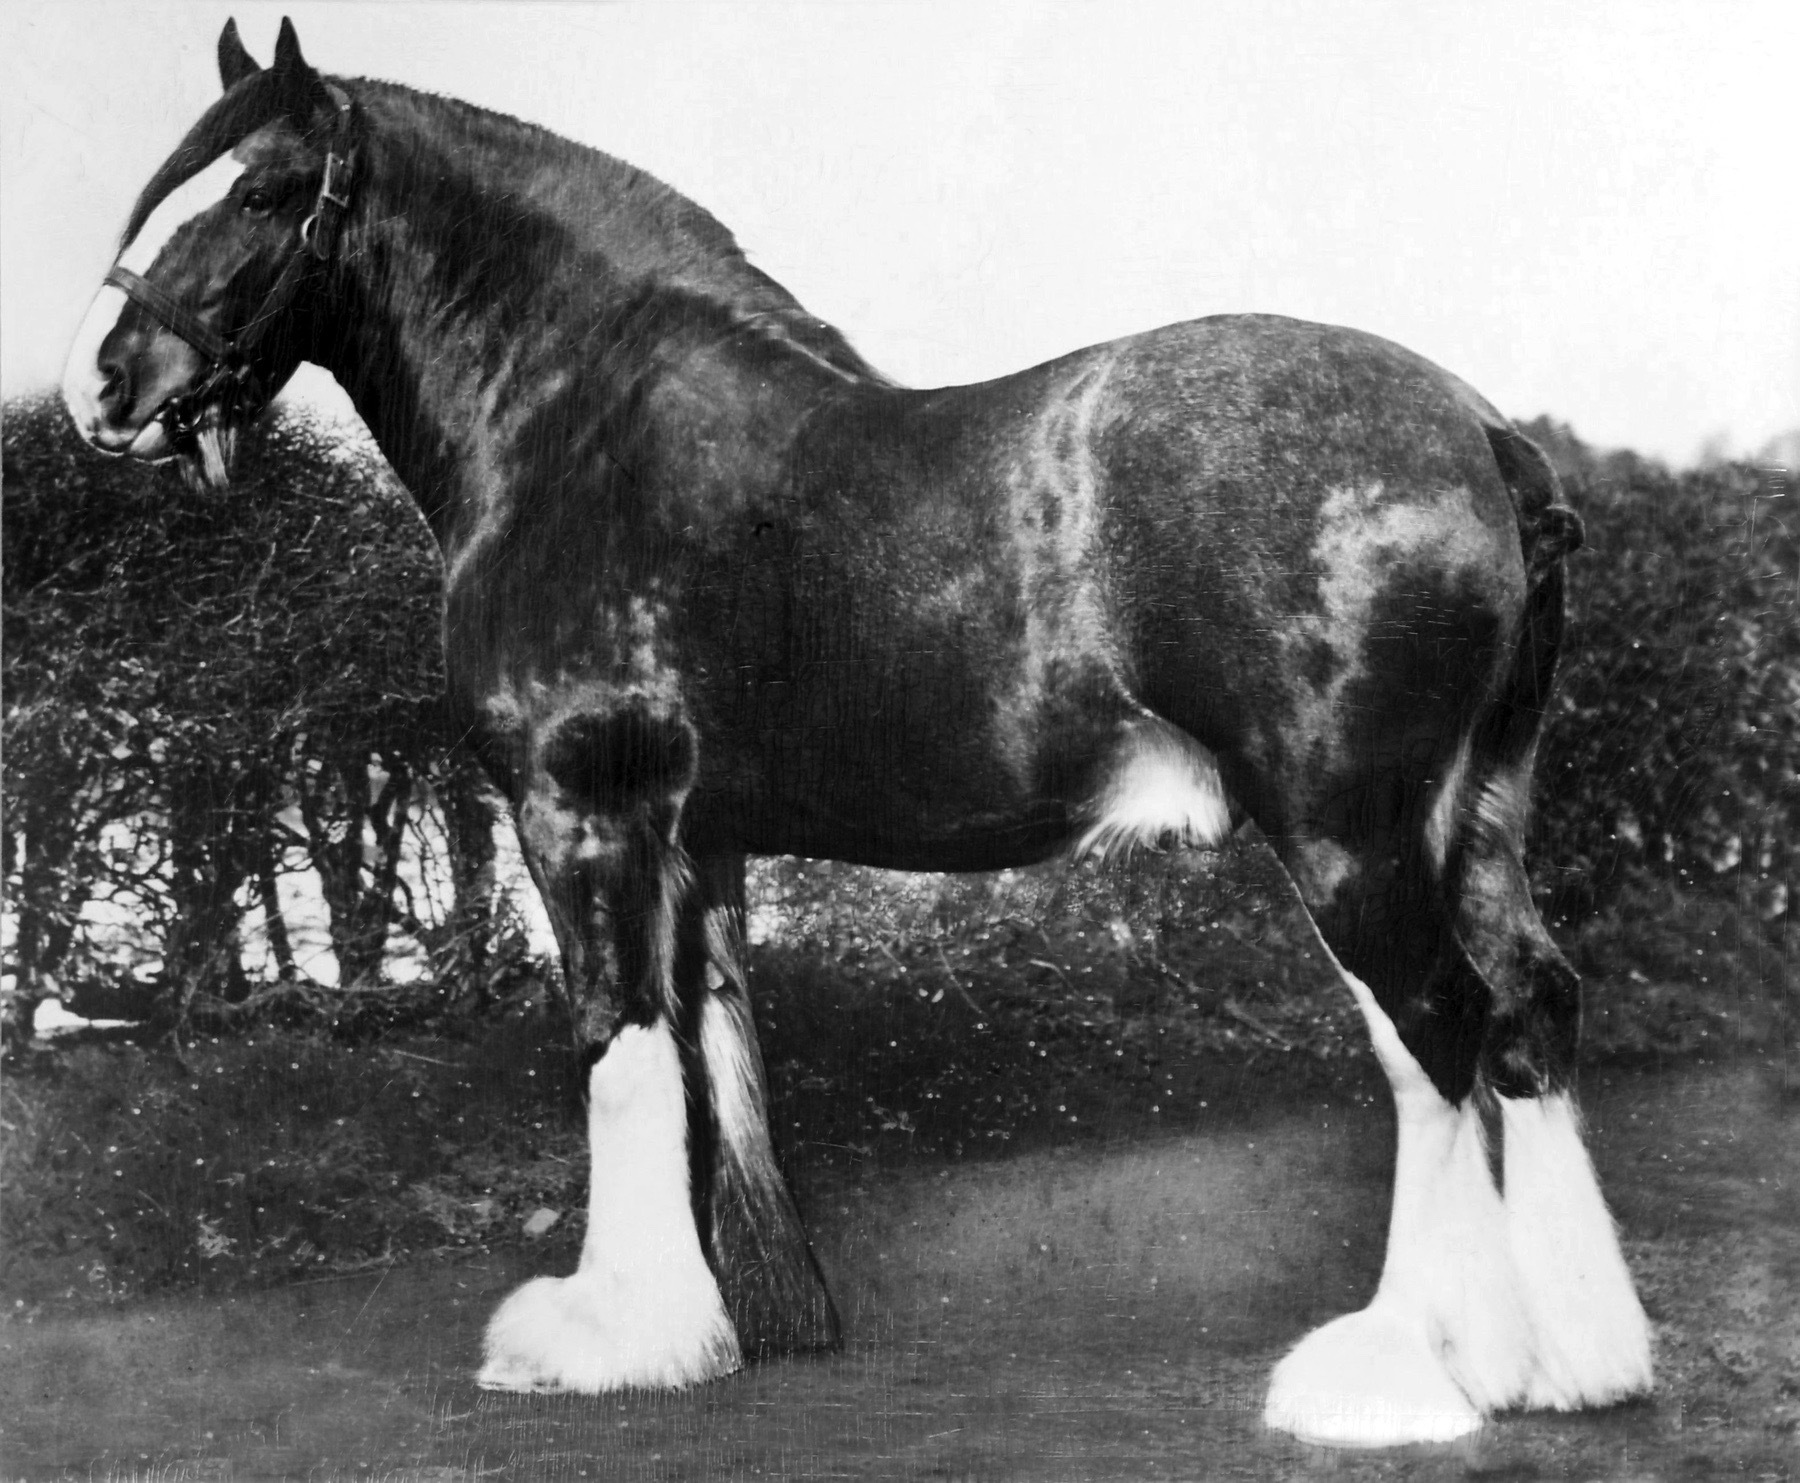 News | Clydesdale Horse Society